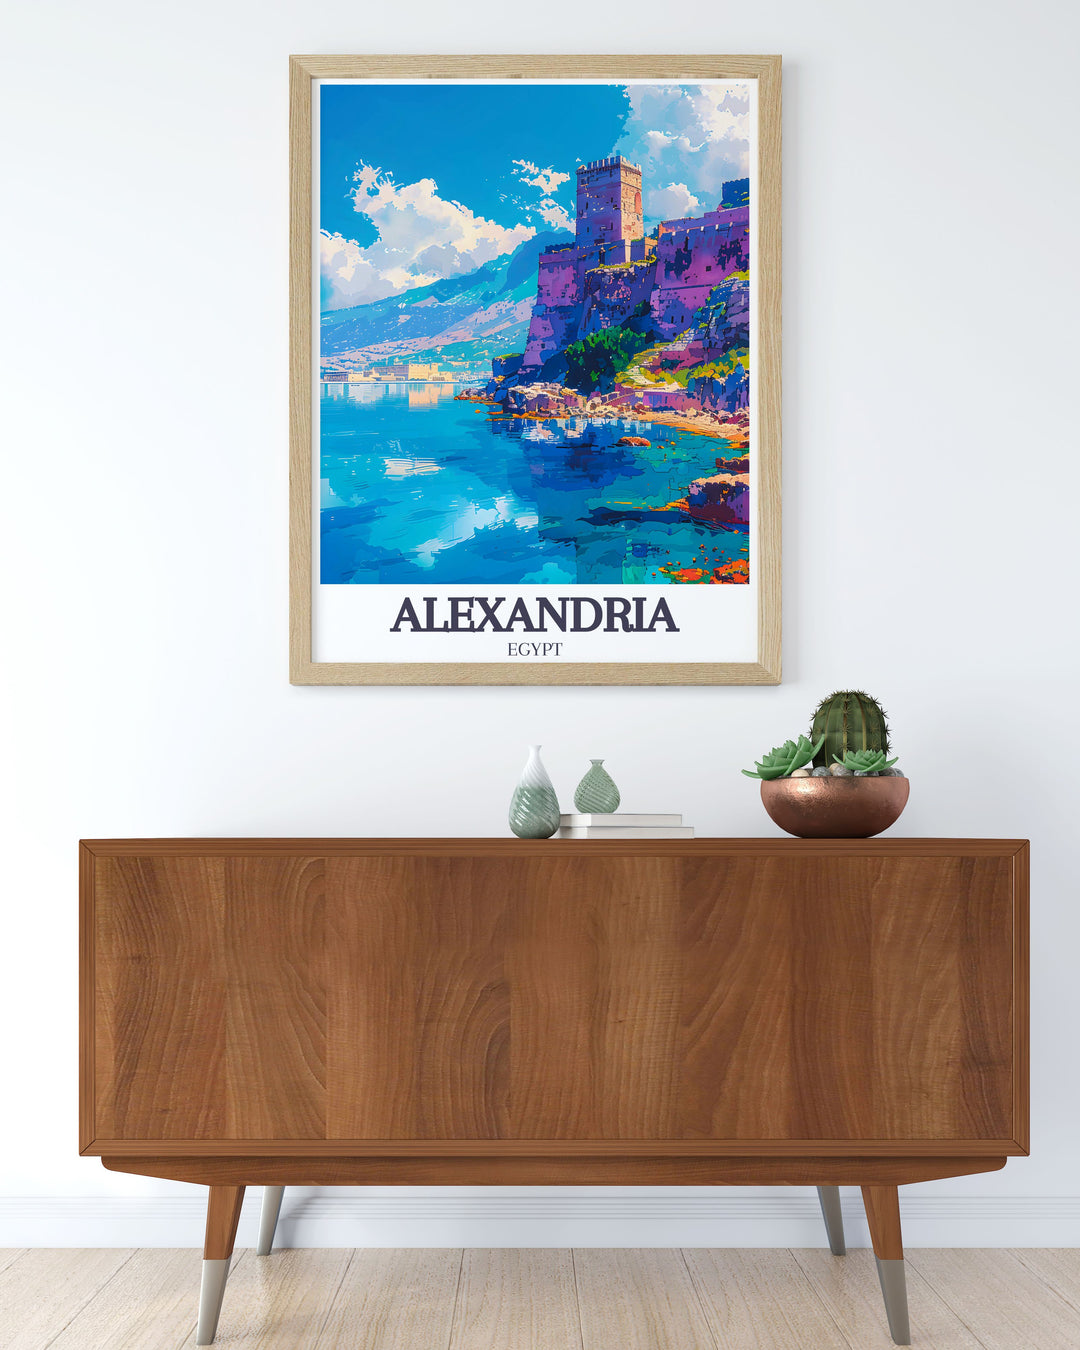 This beautiful Alexandria Egypt poster highlights the Citadel of Qaitbay Pharos Lighthouse in a vibrant and colorful design. Ideal for home or office decor, this print captures the essence of the citys rich history and stunning architecture, adding elegance to any space.